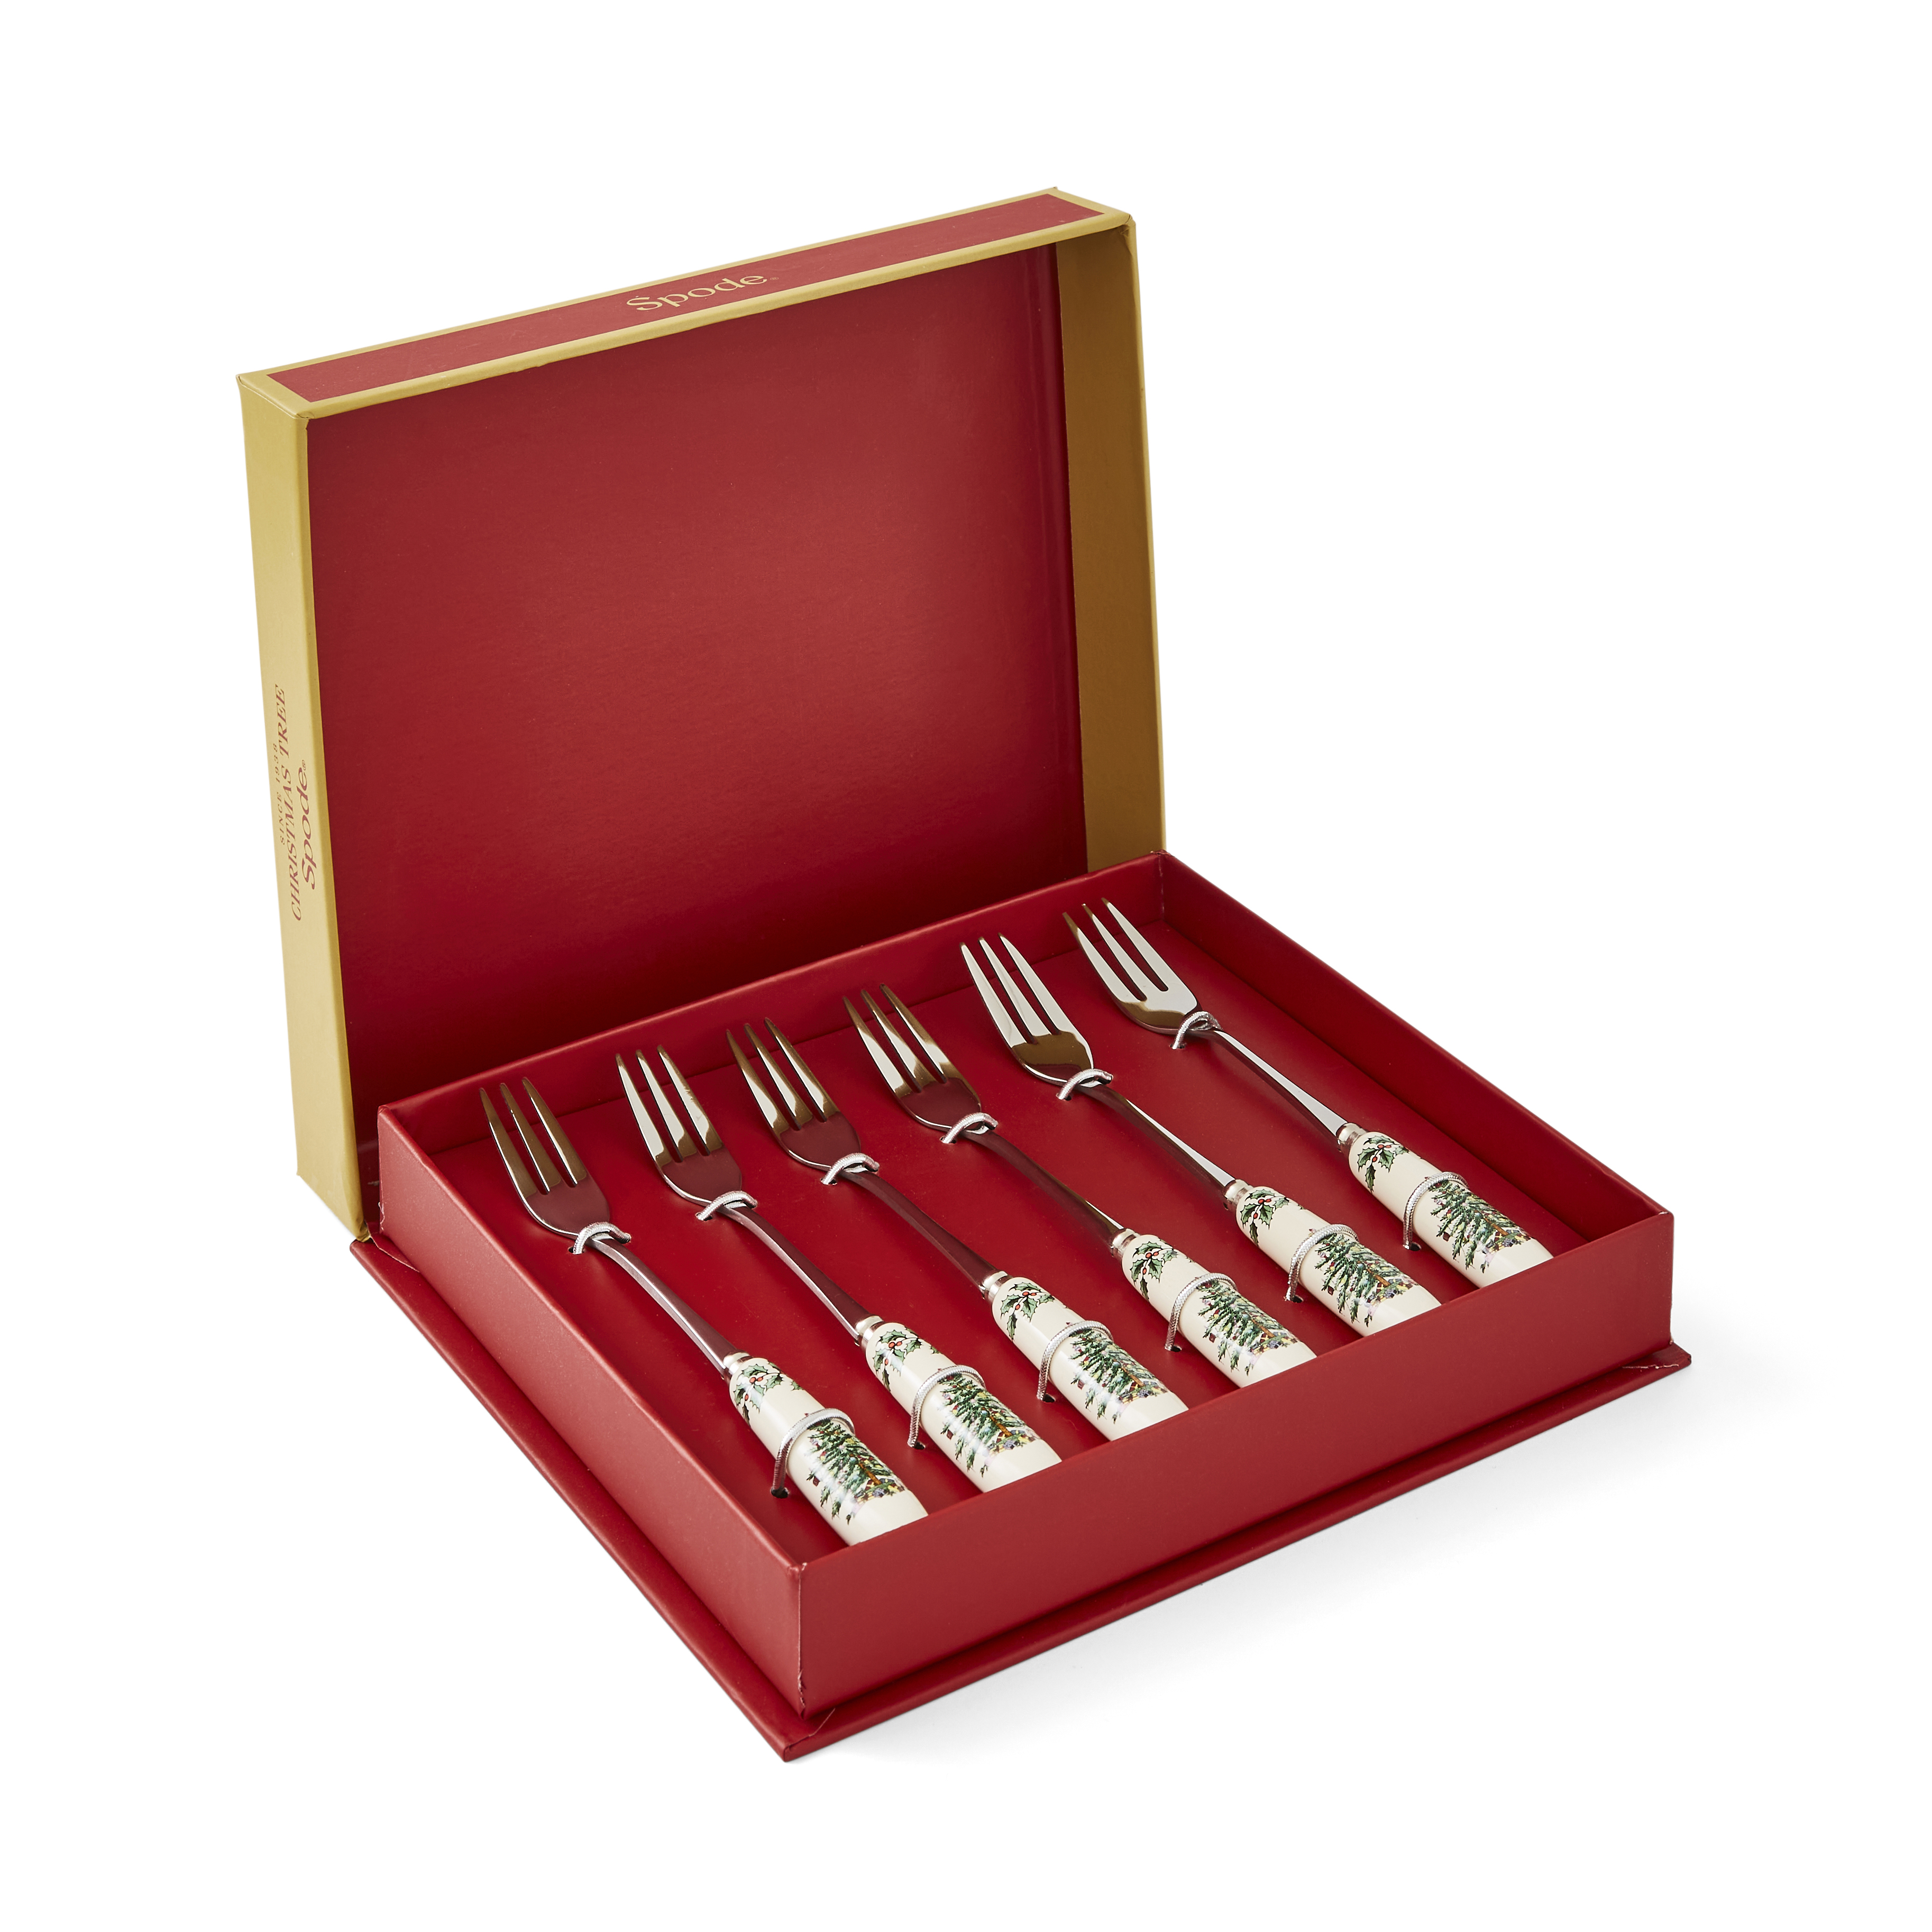 Christmas Tree Pastry Forks Set of 6 image number null